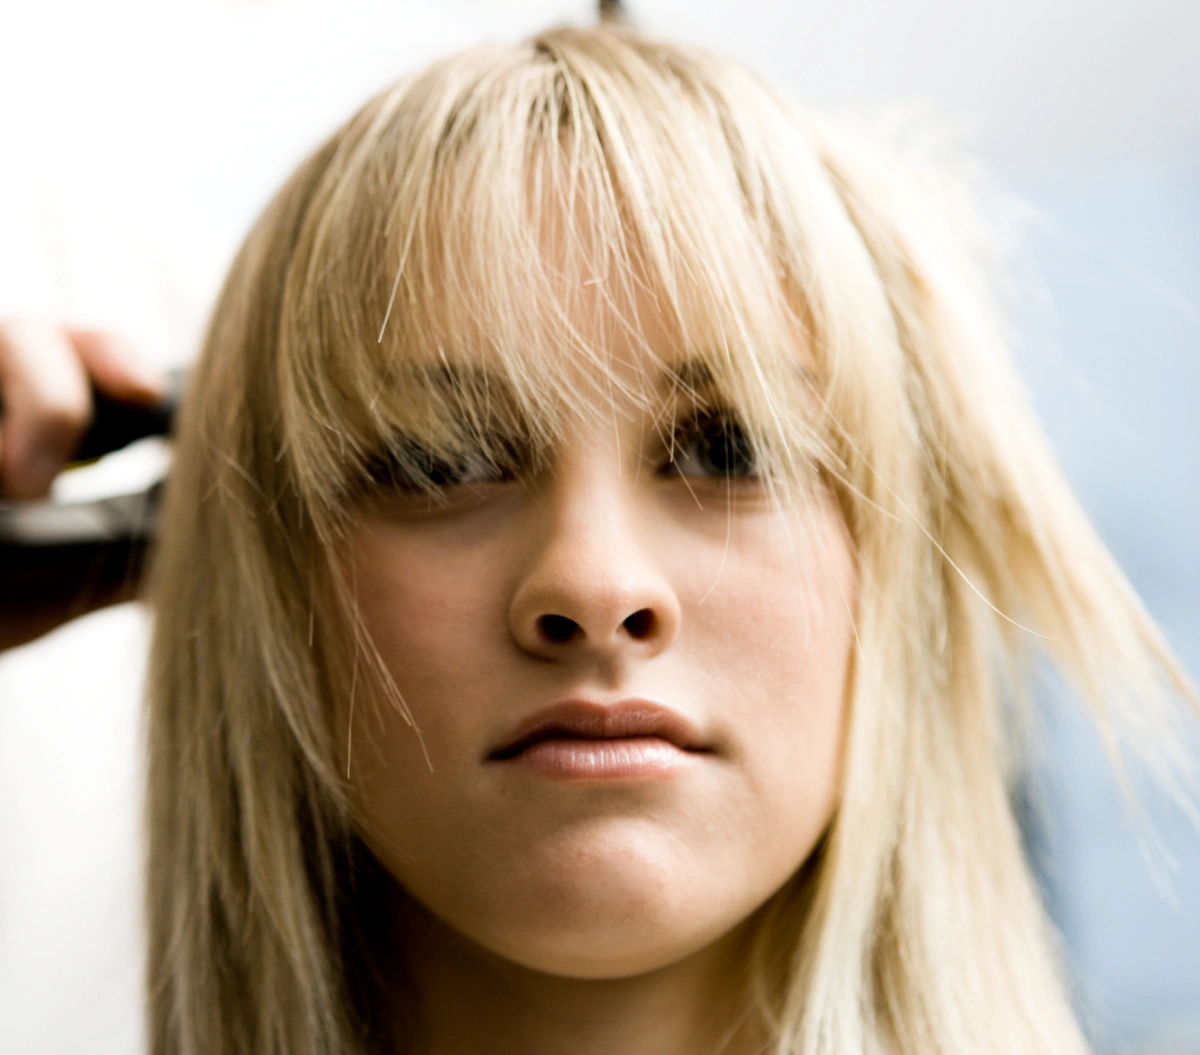 A blonde straightens her hair at the hairdresser's